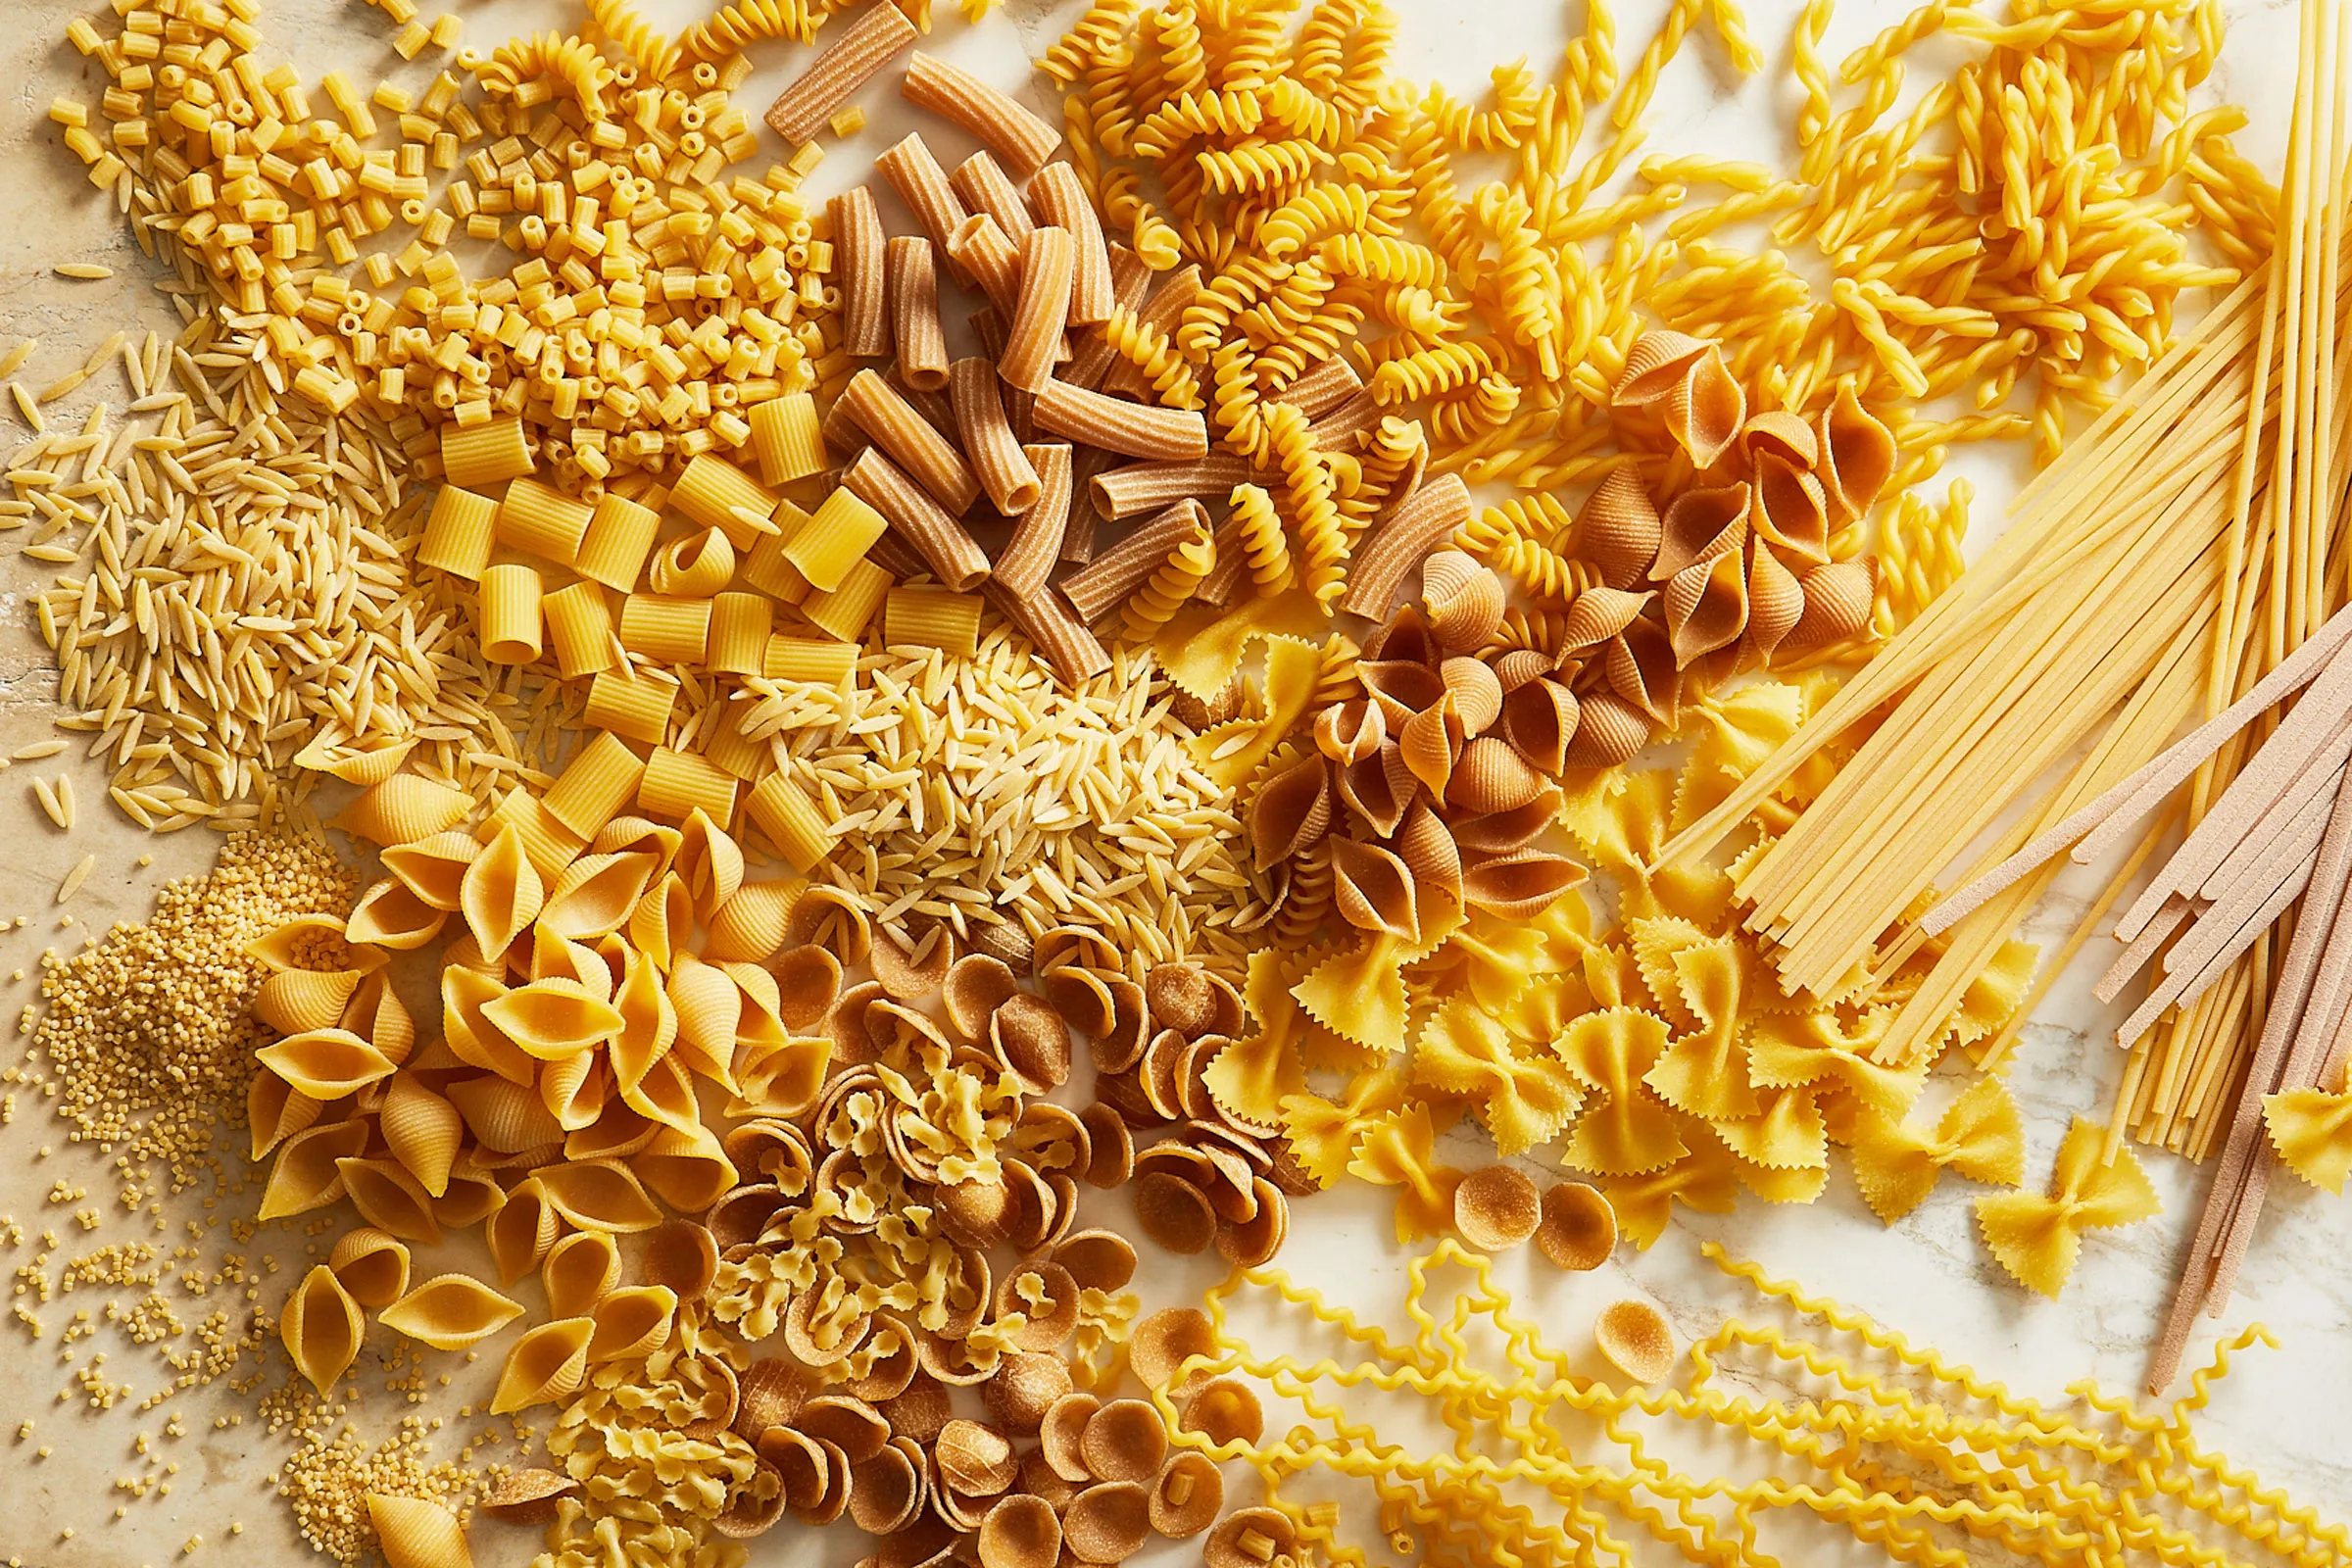 33 Types of Pasta, Their Shapes and Specific Uses